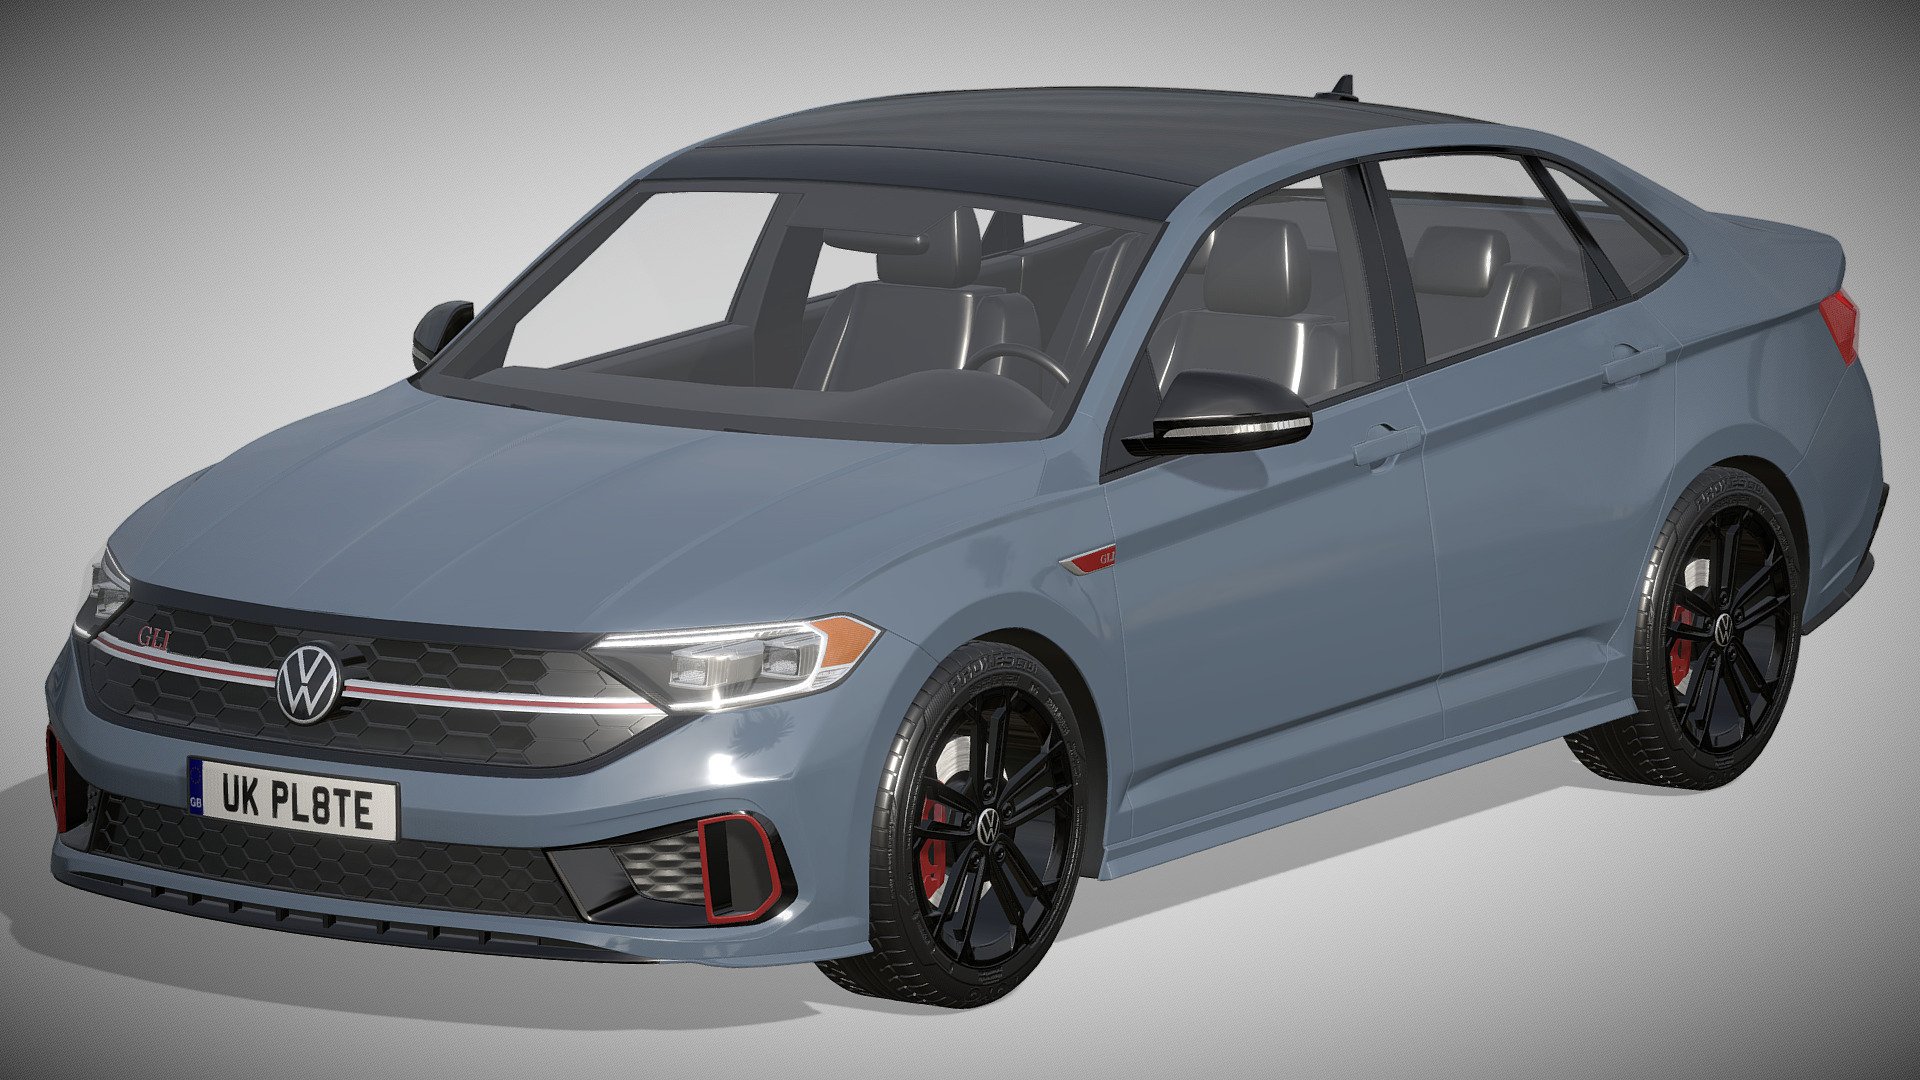 Volkswagen Jetta GLI 2022

https://www.vw.com/en/models/jetta-gli.html

Clean geometry Light weight model, yet completely detailed for HI-Res renders. Use for movies, Advertisements or games

Corona render and materials

All textures include in *.rar files

Lighting setup is not included in the file! - Volkswagen Jetta GLI 2022 - Buy Royalty Free 3D model by zifir3d 3d model